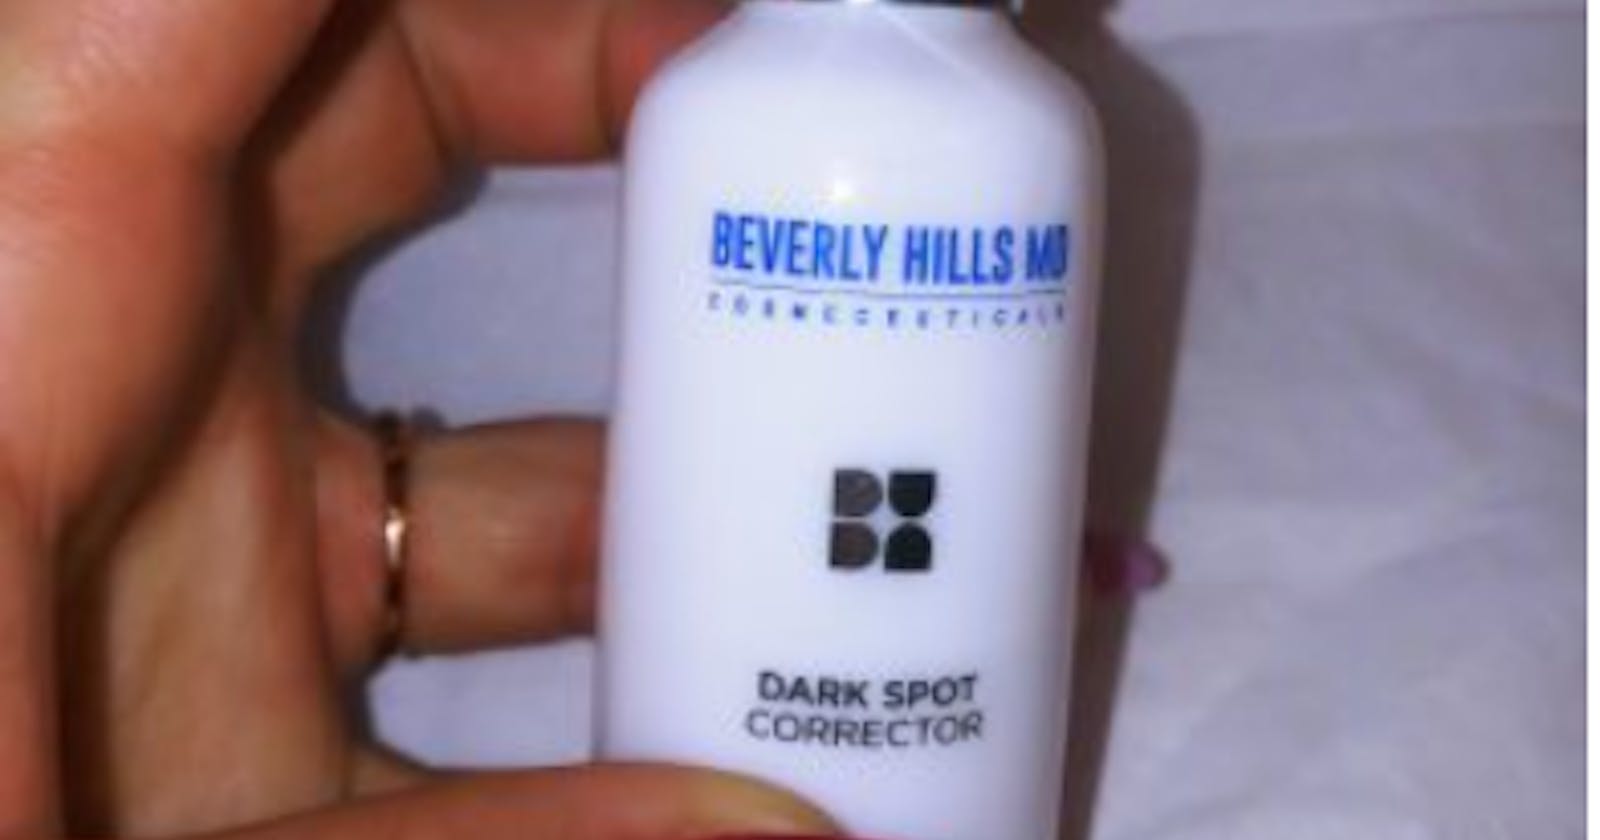 Beverly Hills Md Dark Circle Corrector Reviews: Is it Useful or not?